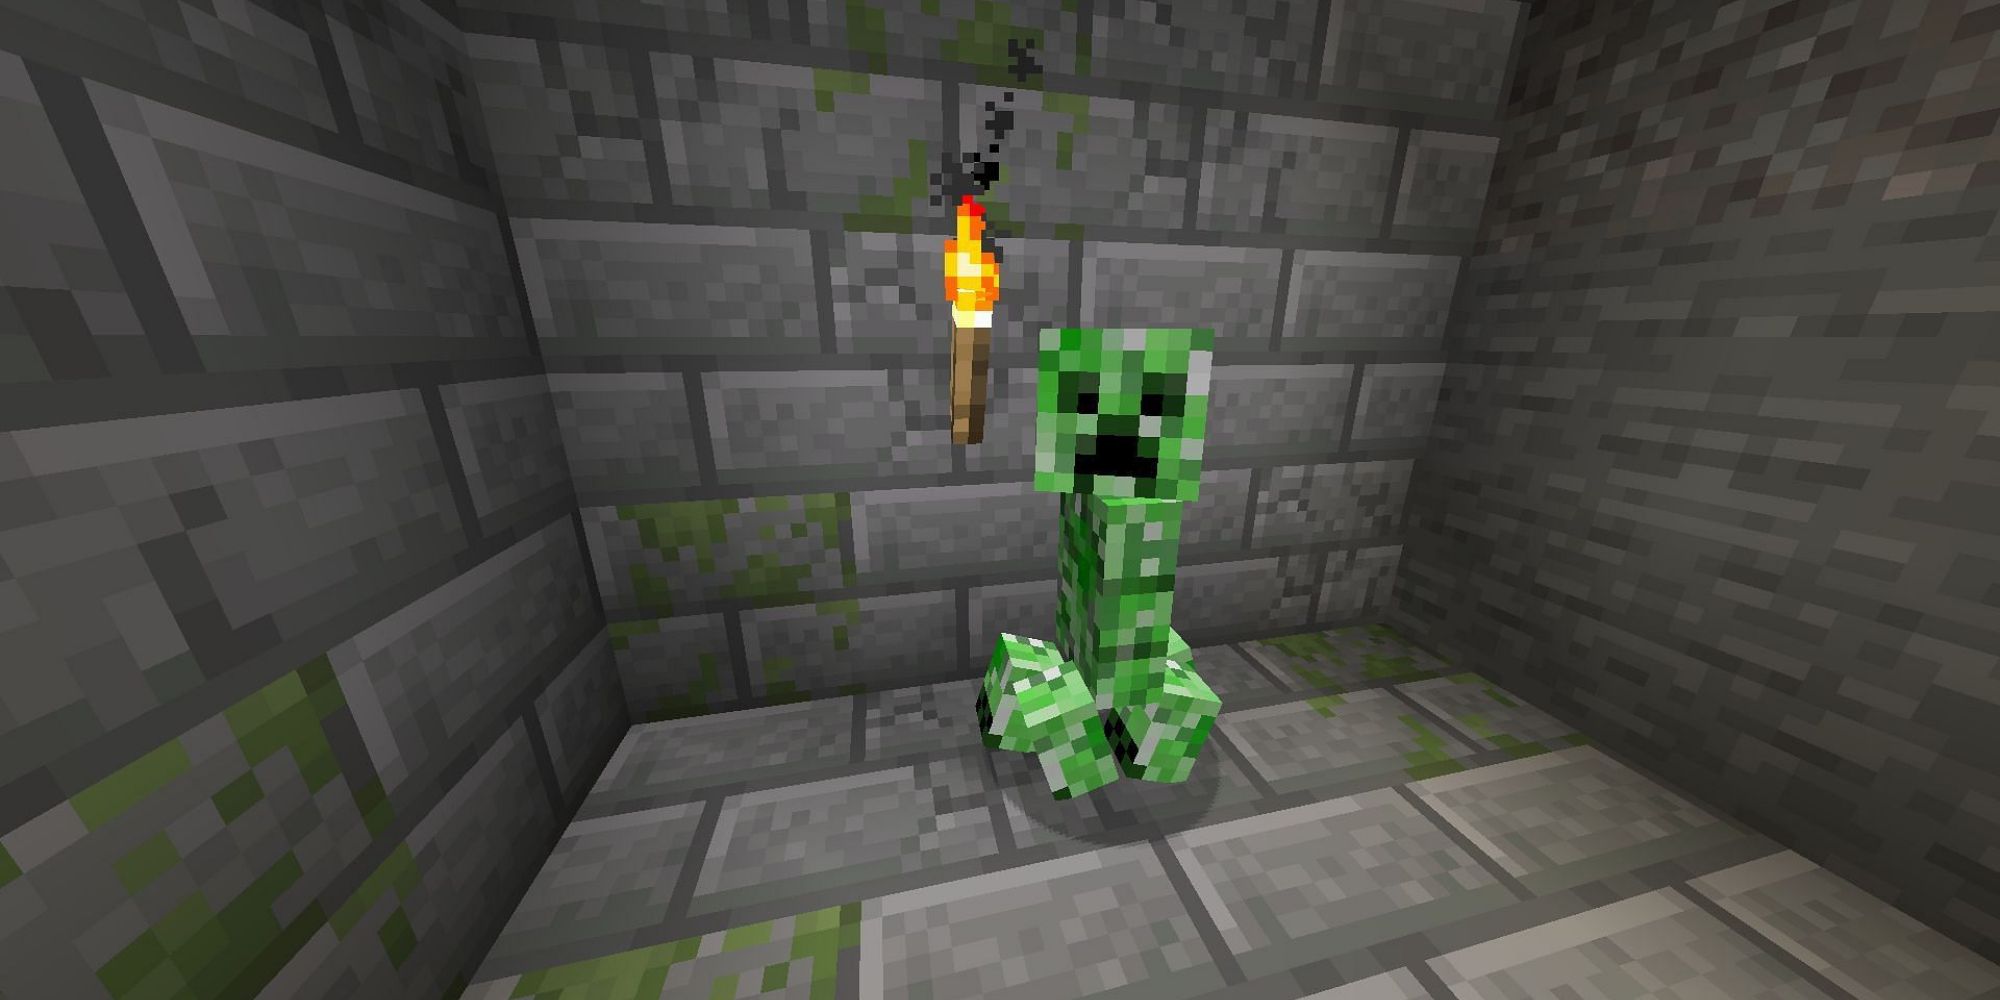 A Minecraft Creeper has spotted the player